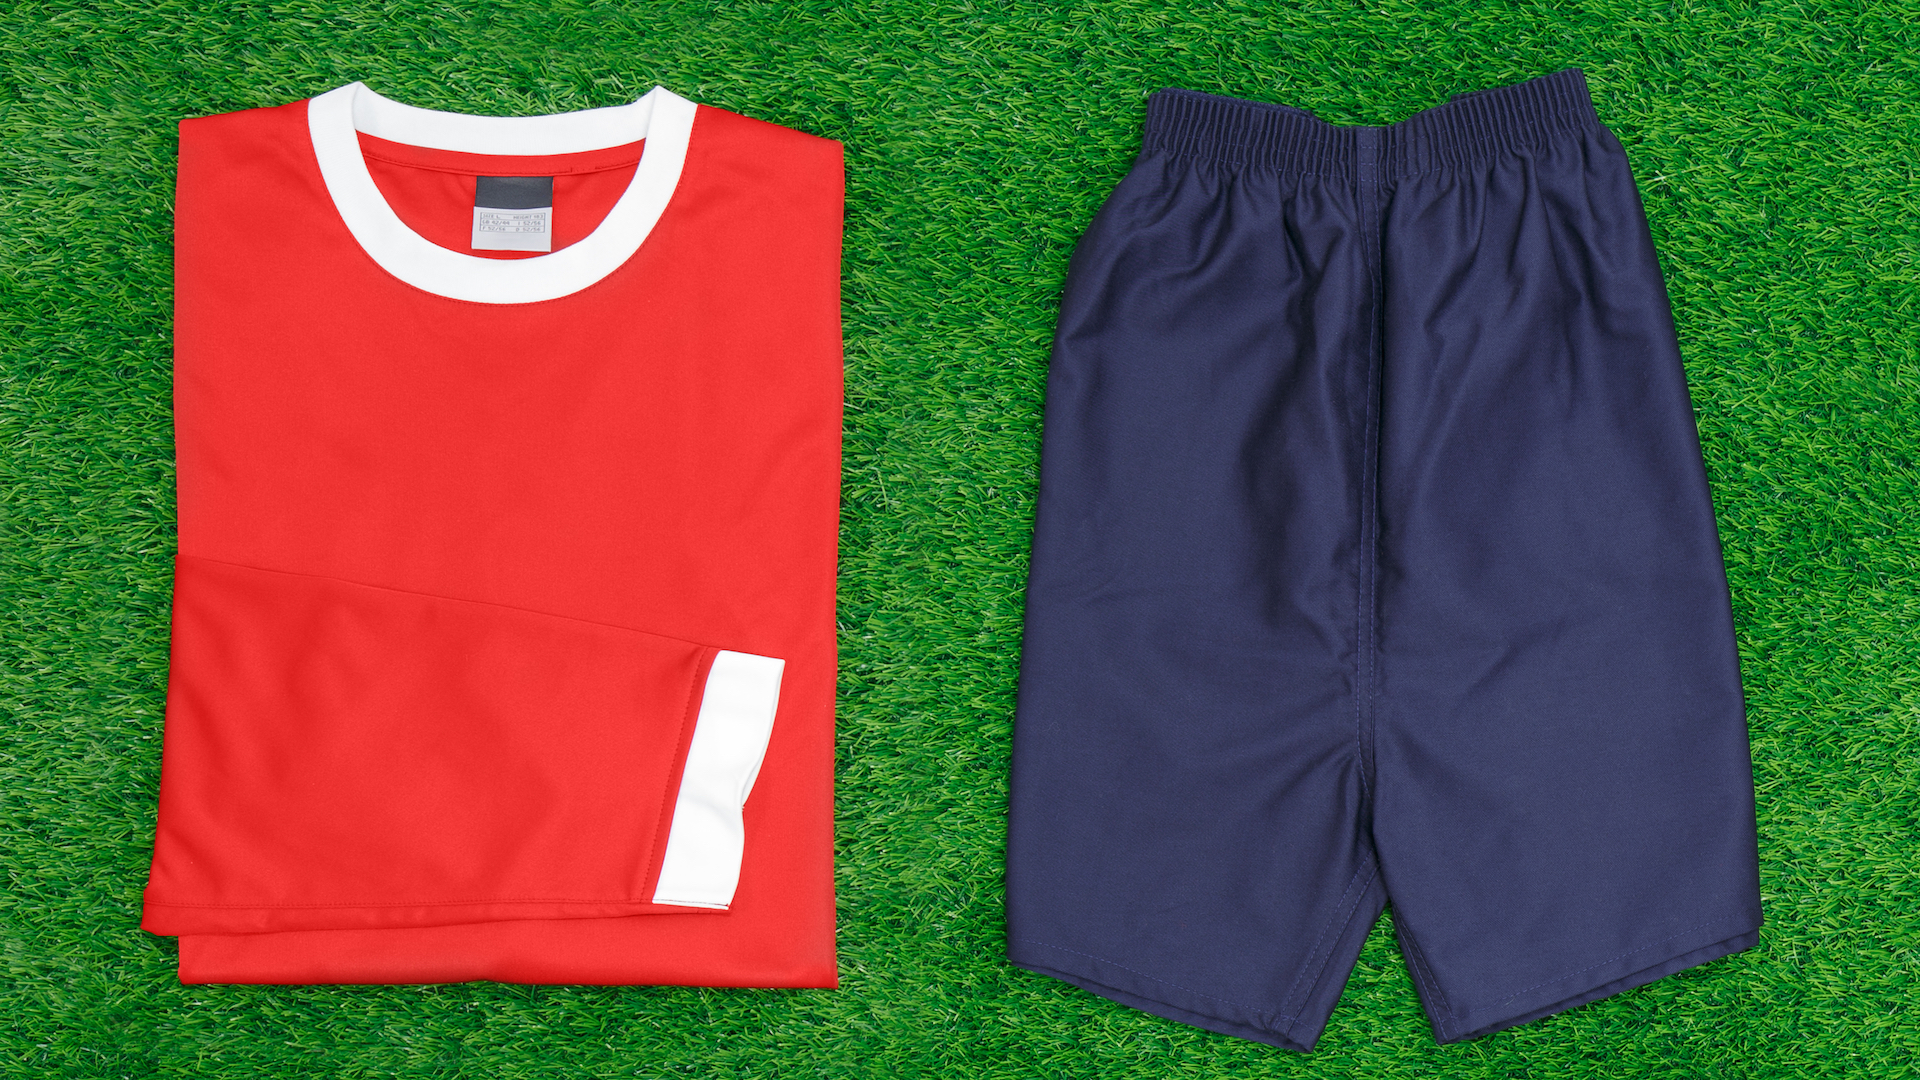 Football kit neatly laid out